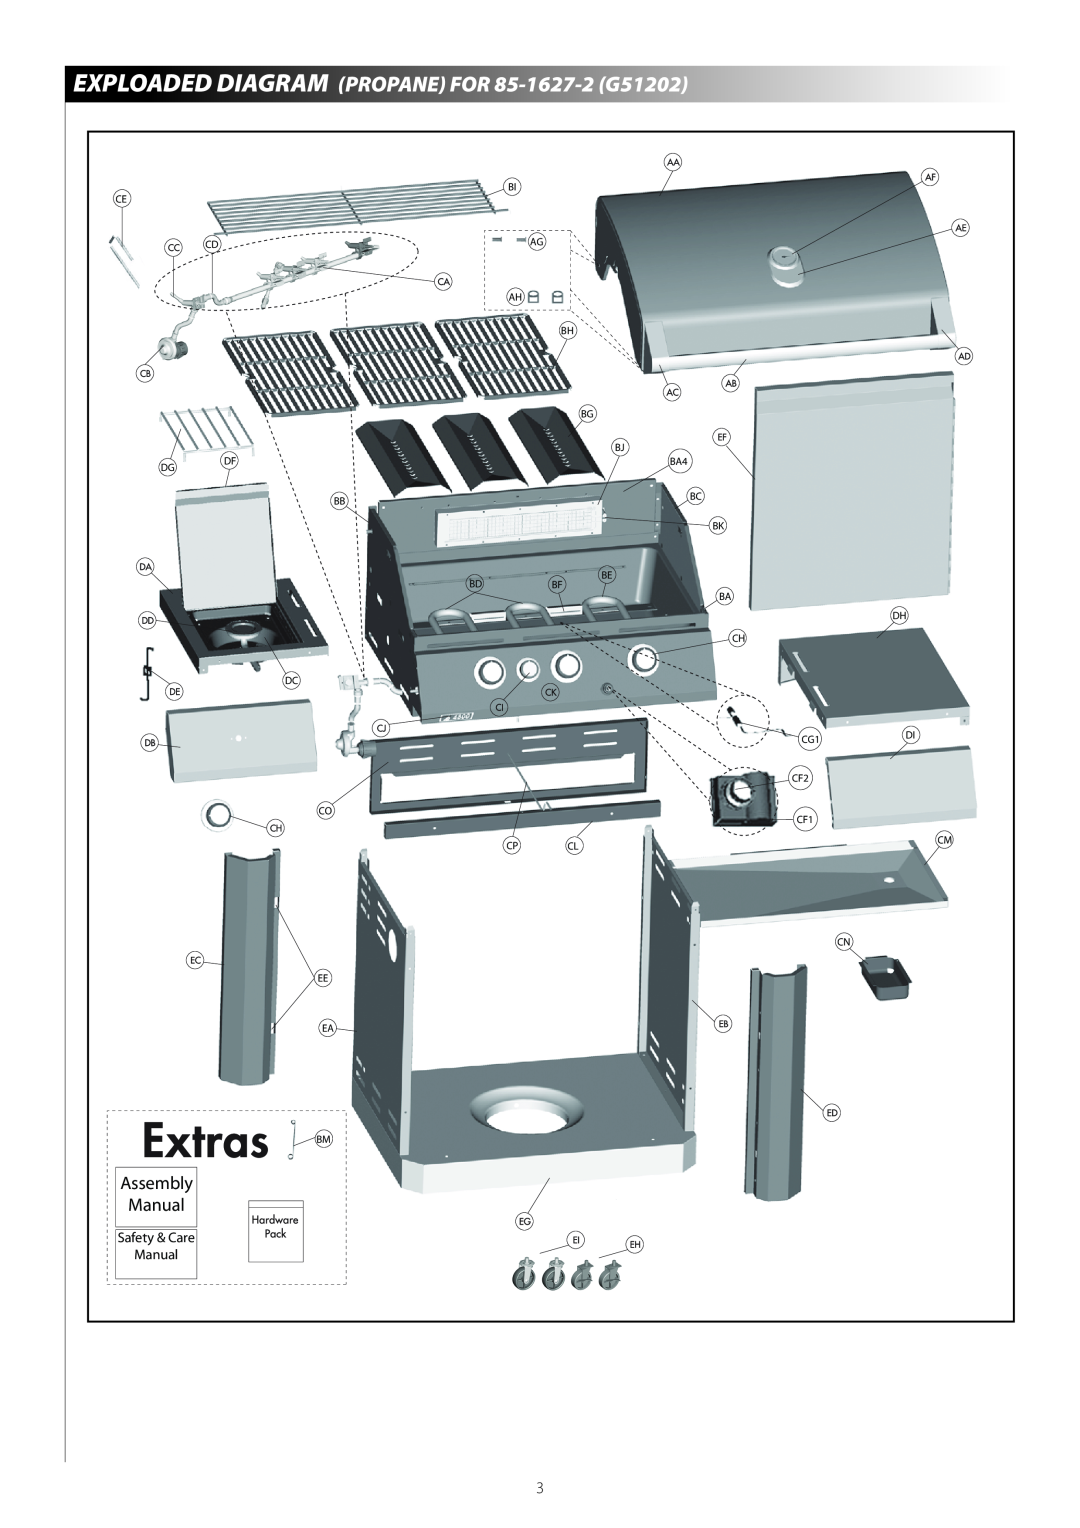 Centro G51204 warranty EXPLOADED DIAGRAM PROPANE FOR 85-1627-2 G51202, Manual, Assembly 